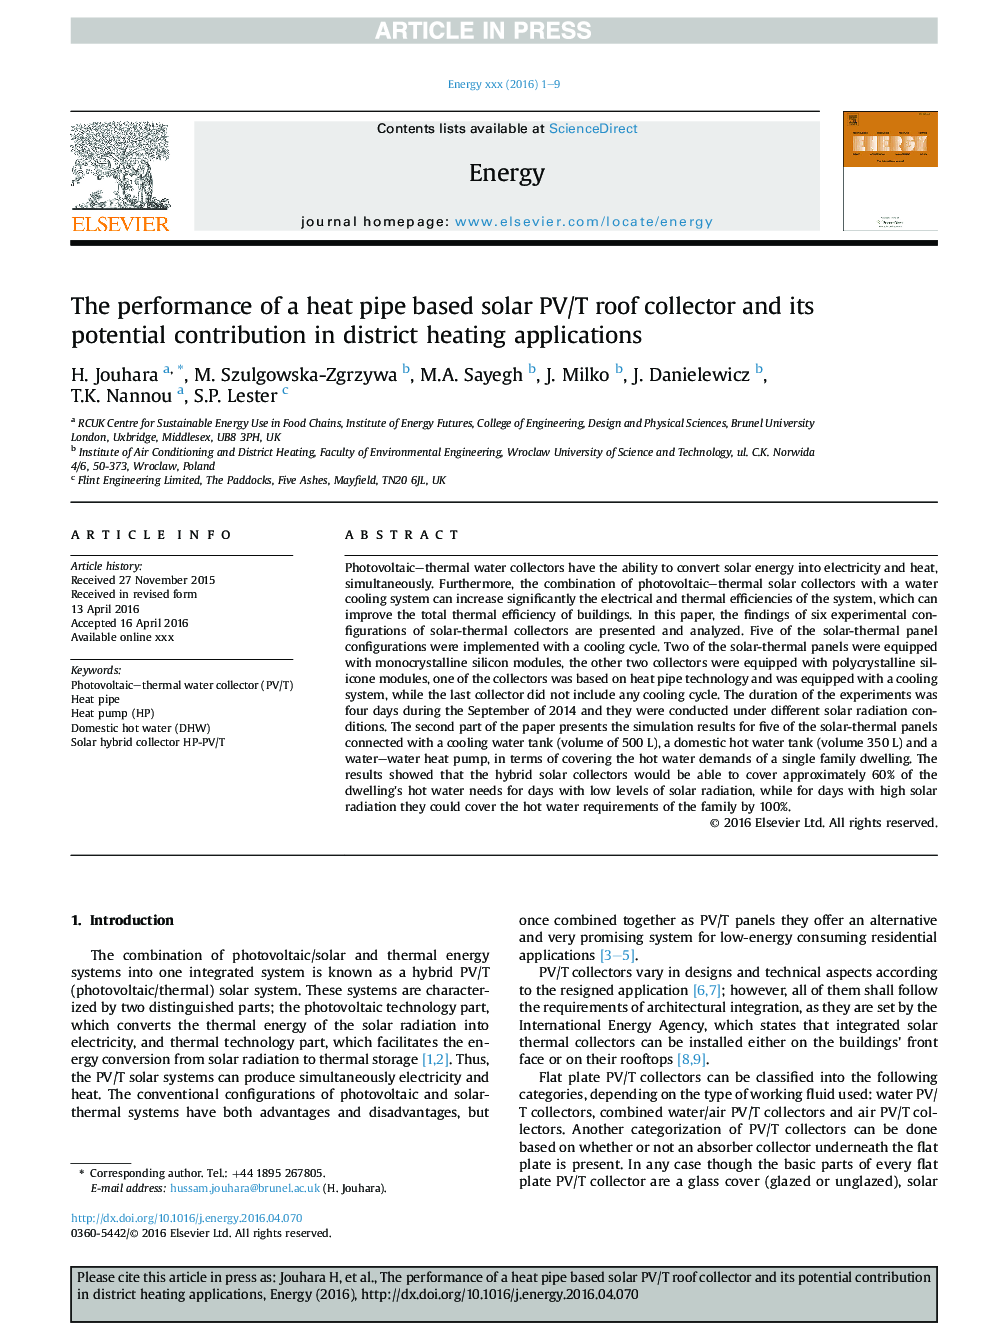 The performance of a heat pipe based solar PV/T roof collector and its potential contribution in district heating applications